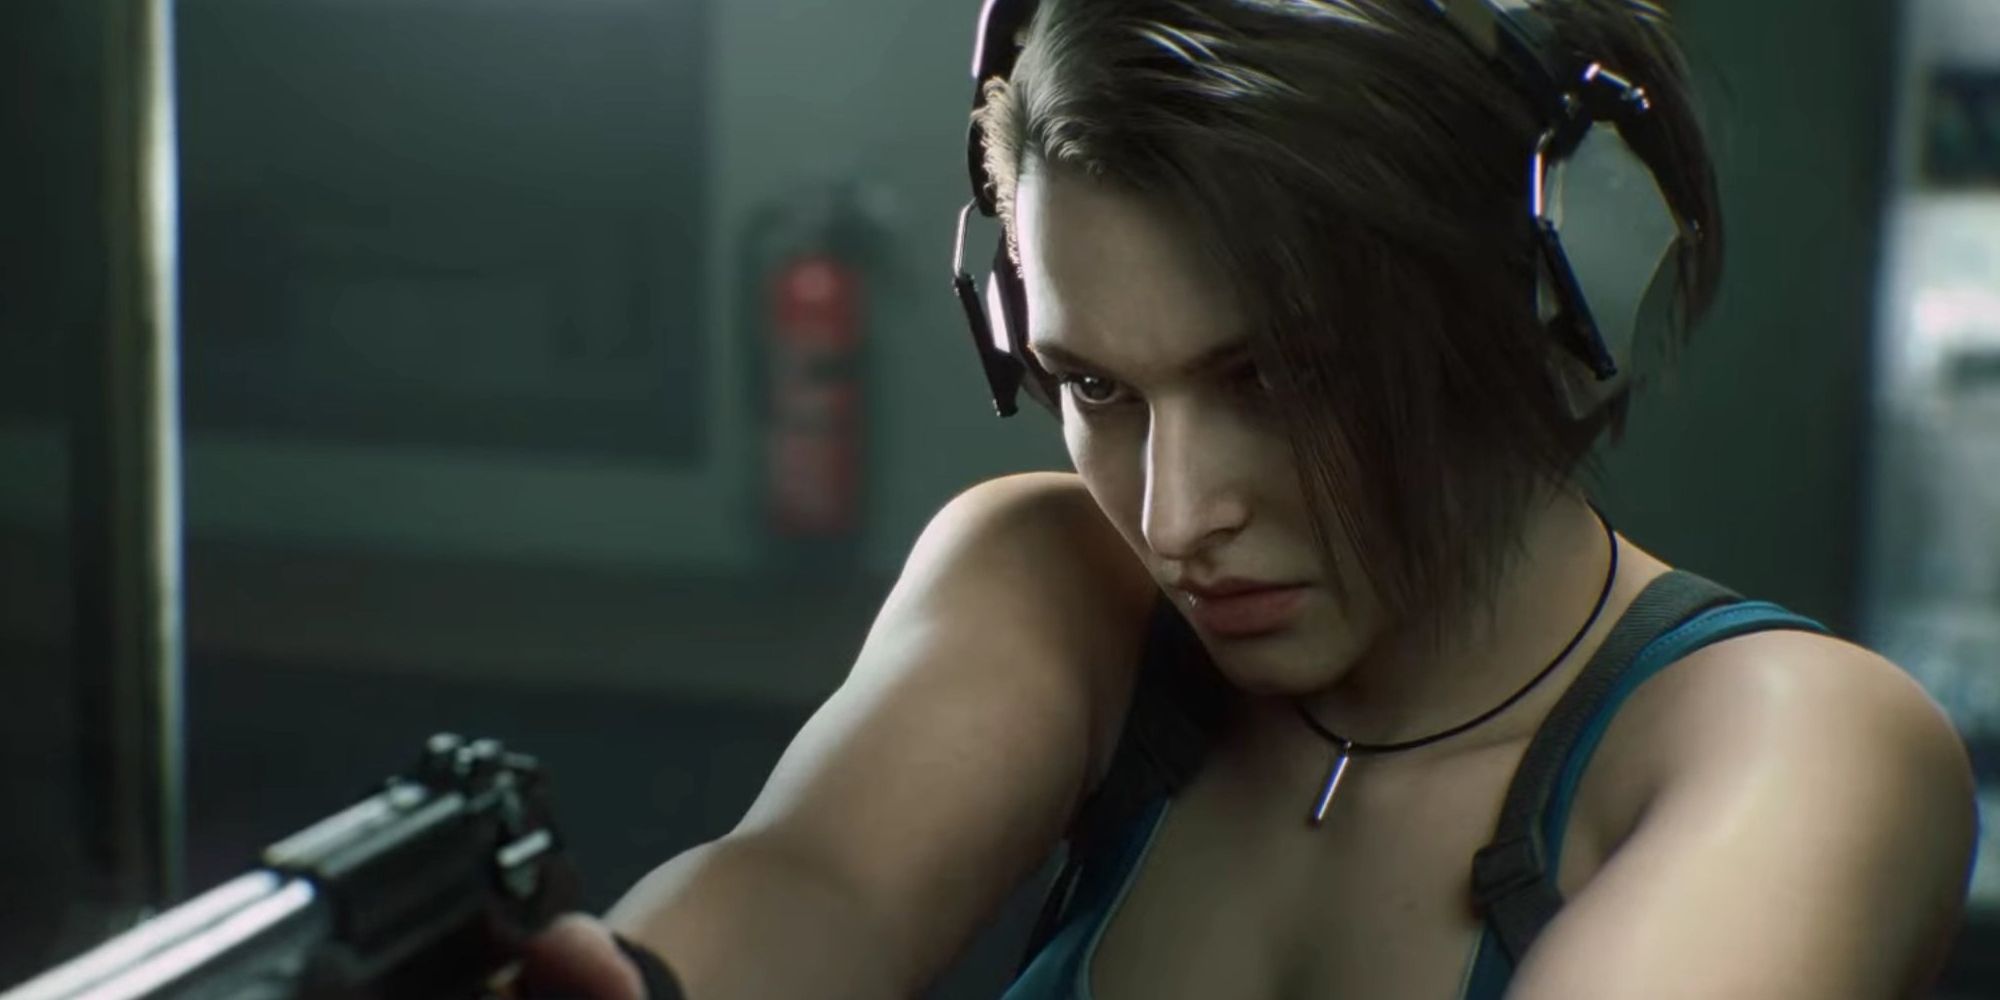 Resident Evil Death Island Jill Valentine at a shooting range with headphones on, pointing a pistol past the camera